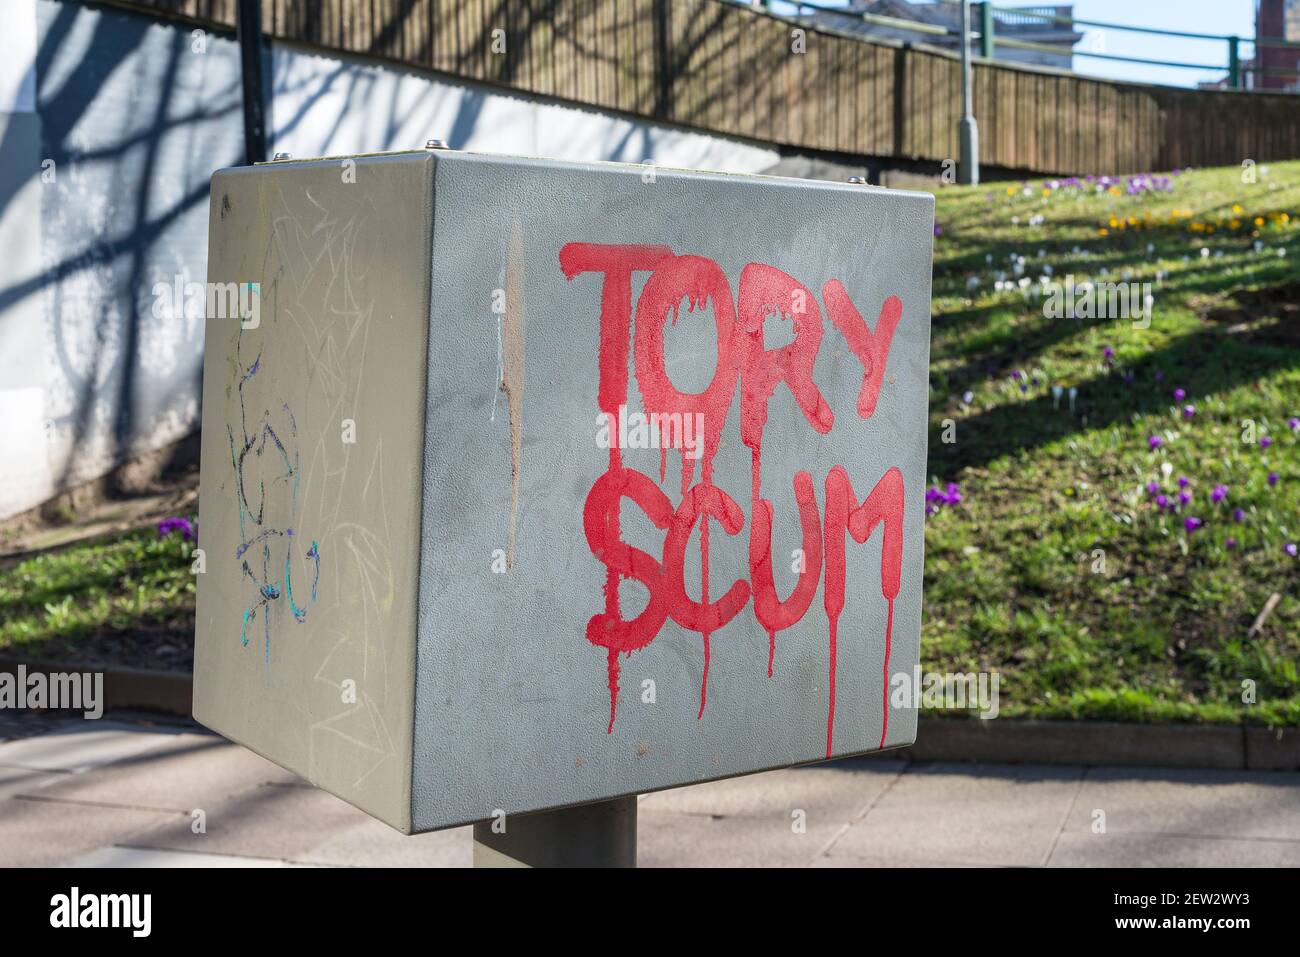 Tory Scum anti-government conservative party graffiti message painted in red Stock Photo